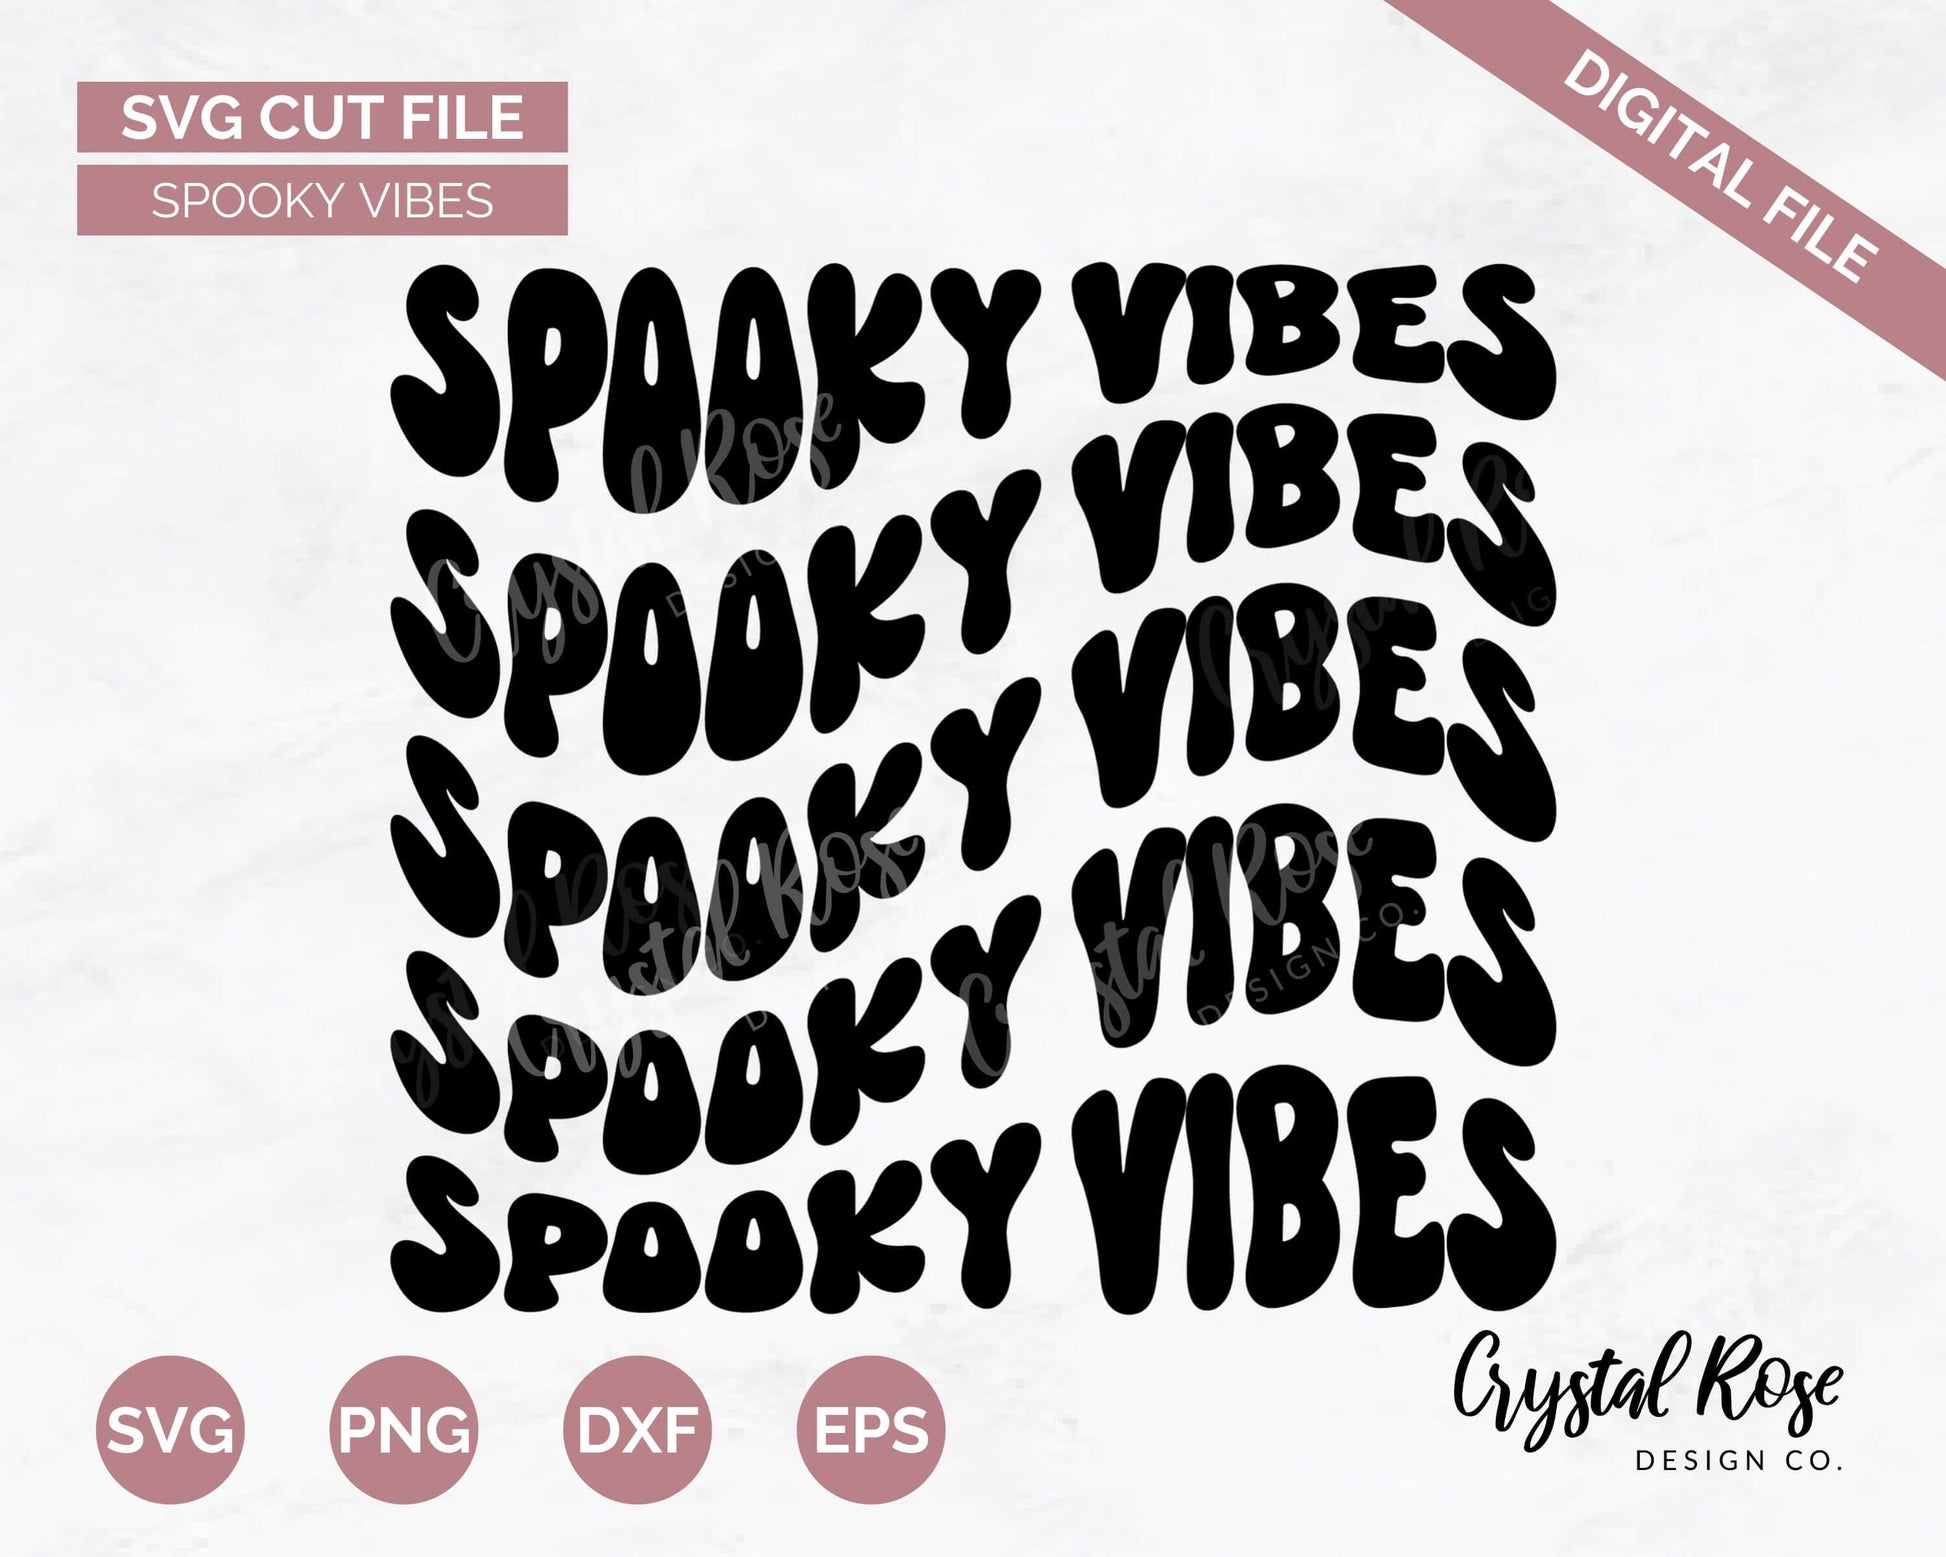 Spooky Vibes SVG, Fall SVG, Digital Download, Cricut, Silhouette, Glowforge (includes svg/png/dxf/eps) - Crystal Rose Design Co.